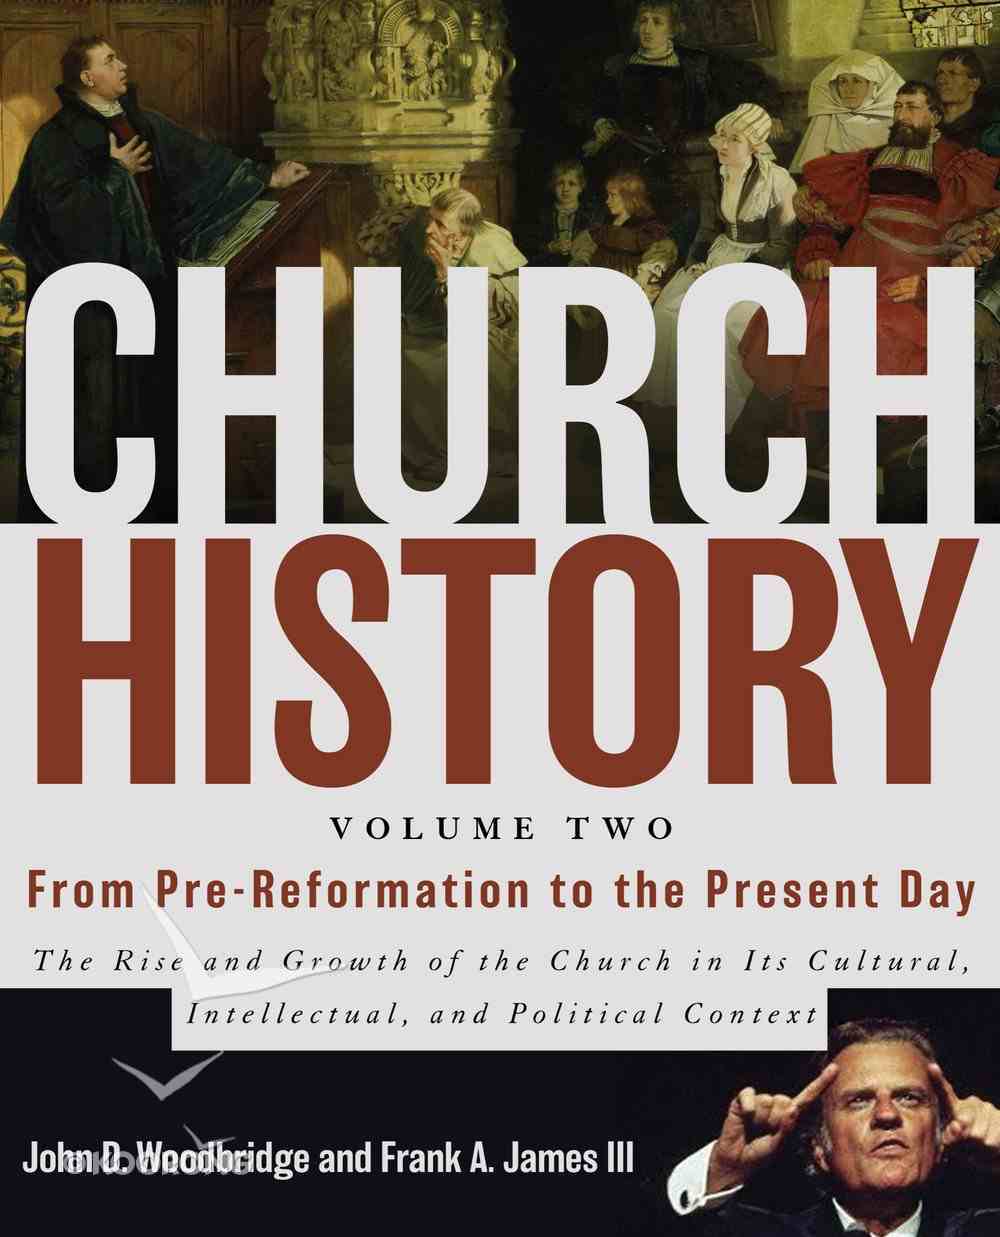 Church History, Volume Two: From Pre-Reformation to the Present Day eBook